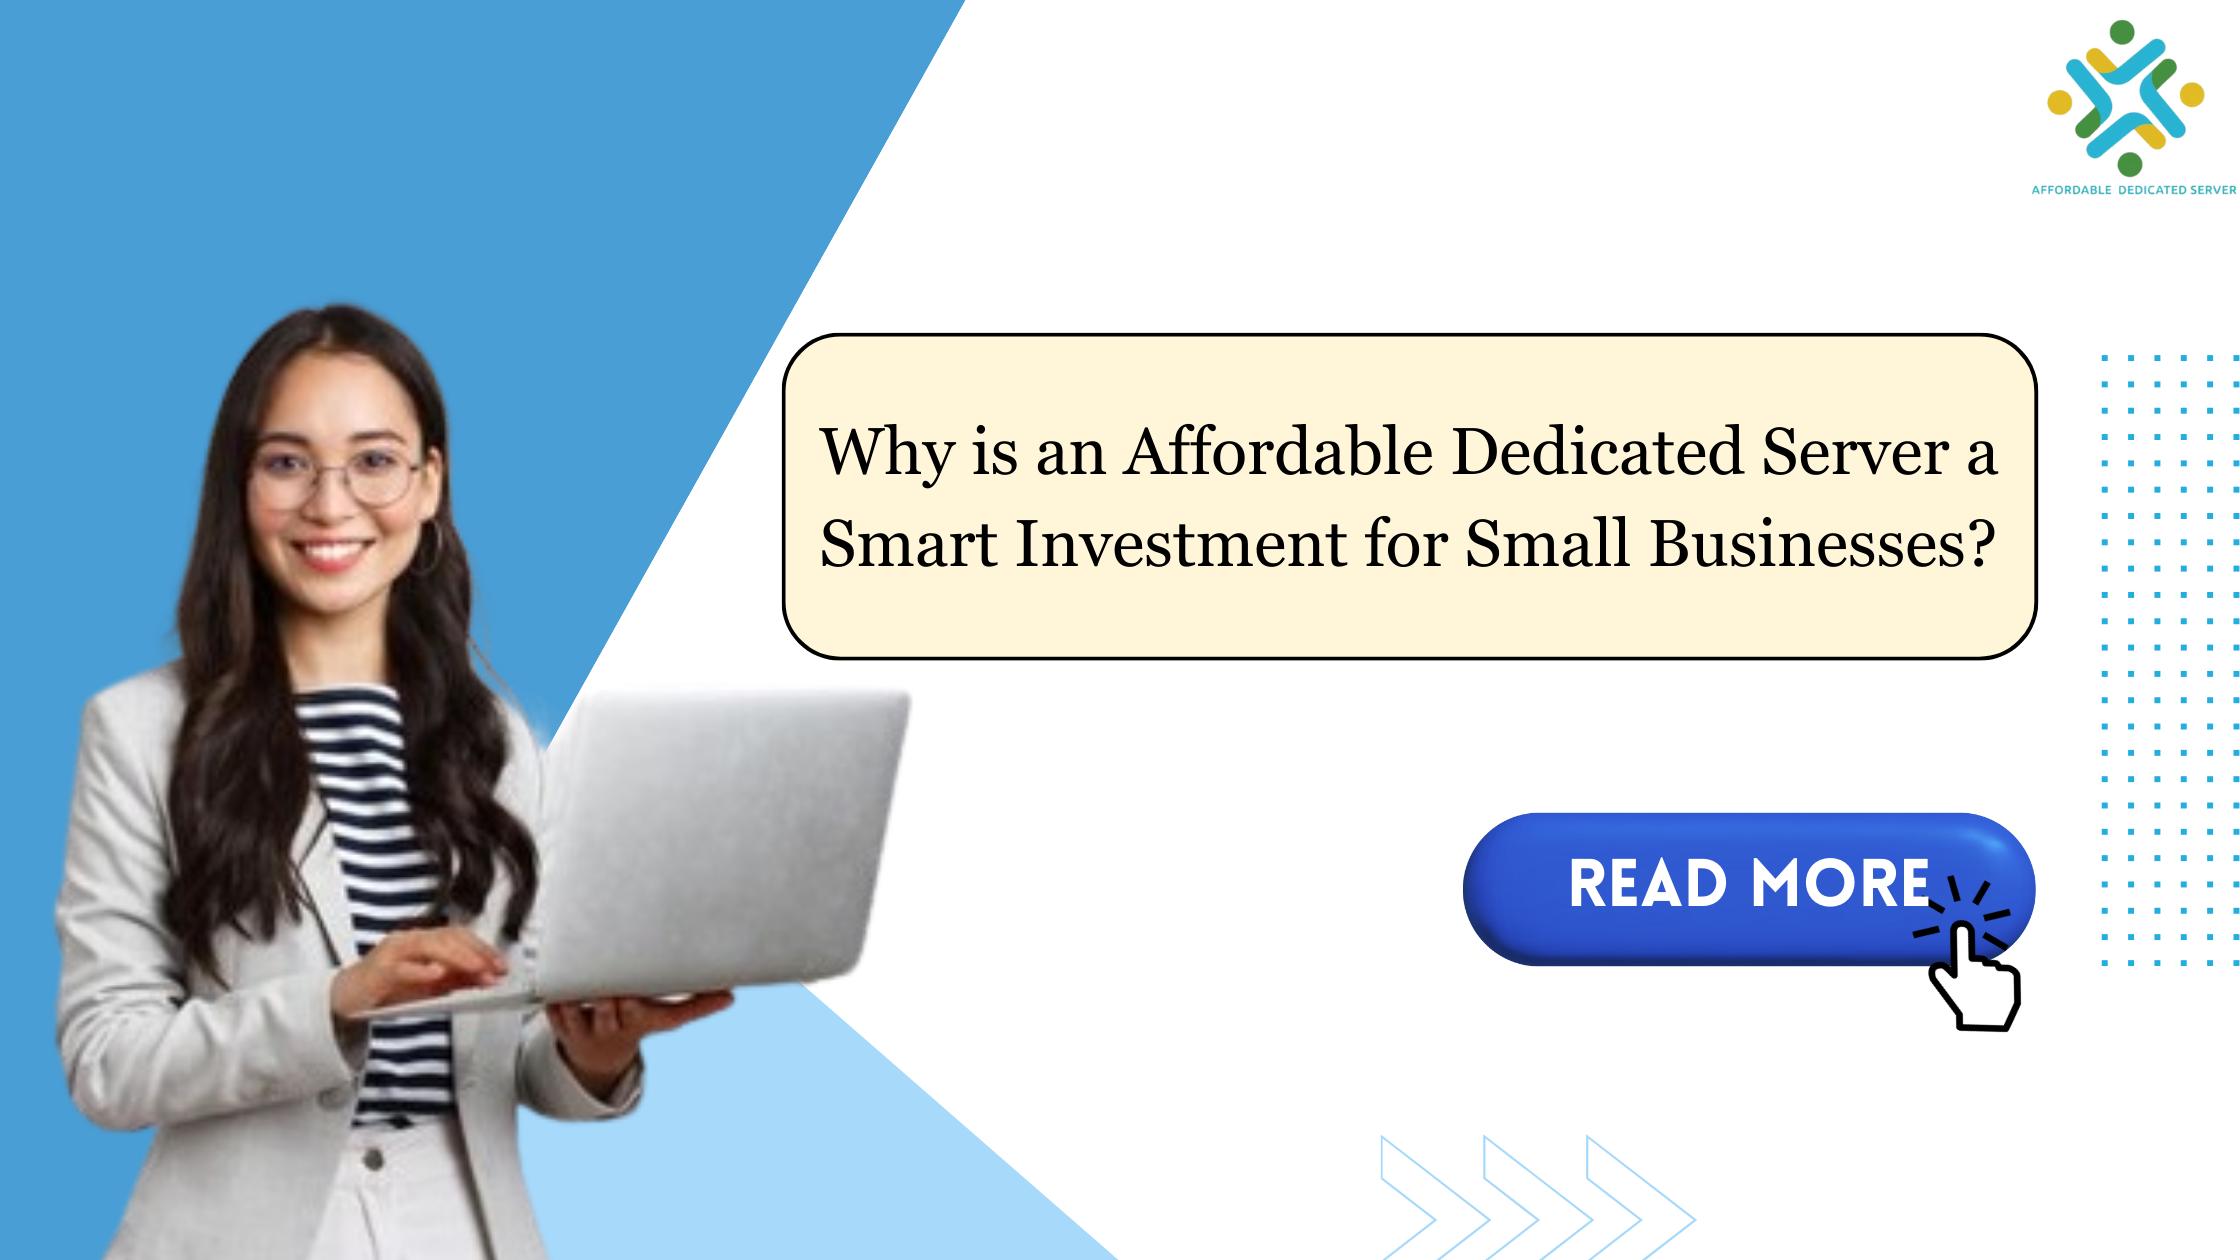 Why is an Affordable Dedicated Server a Smart Investment for Small Businesses